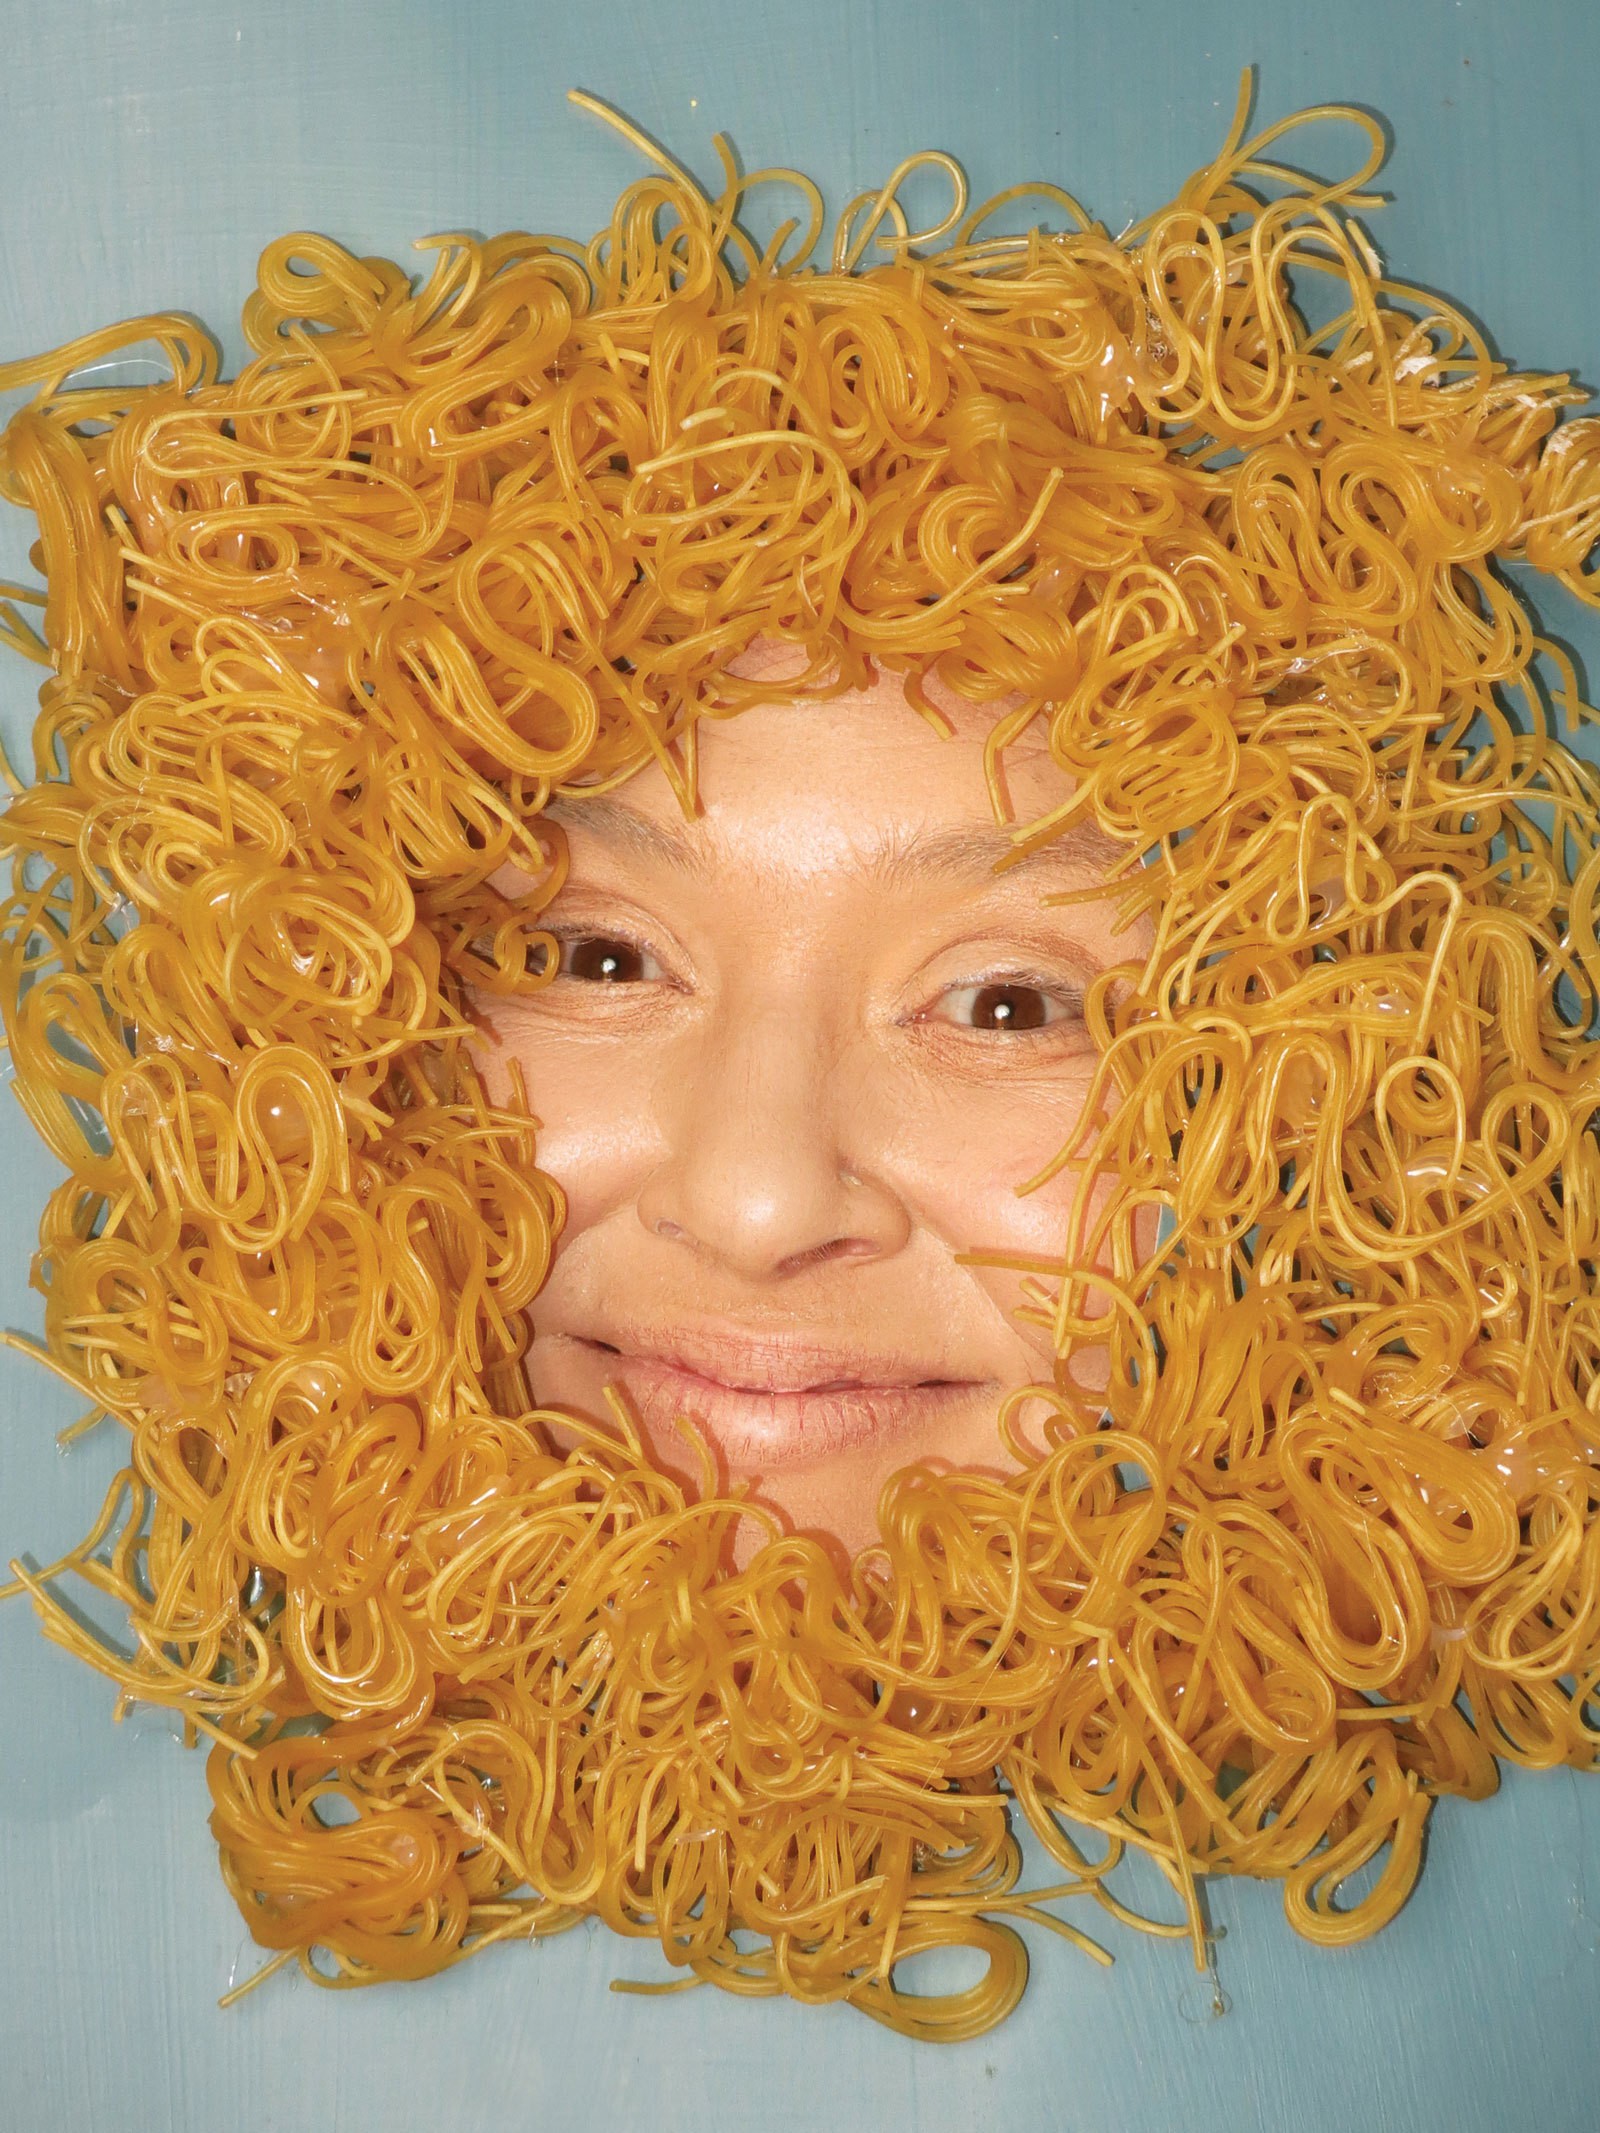 A Photographer Transforms Herself Into Ramen Noodles, Karl and Justin